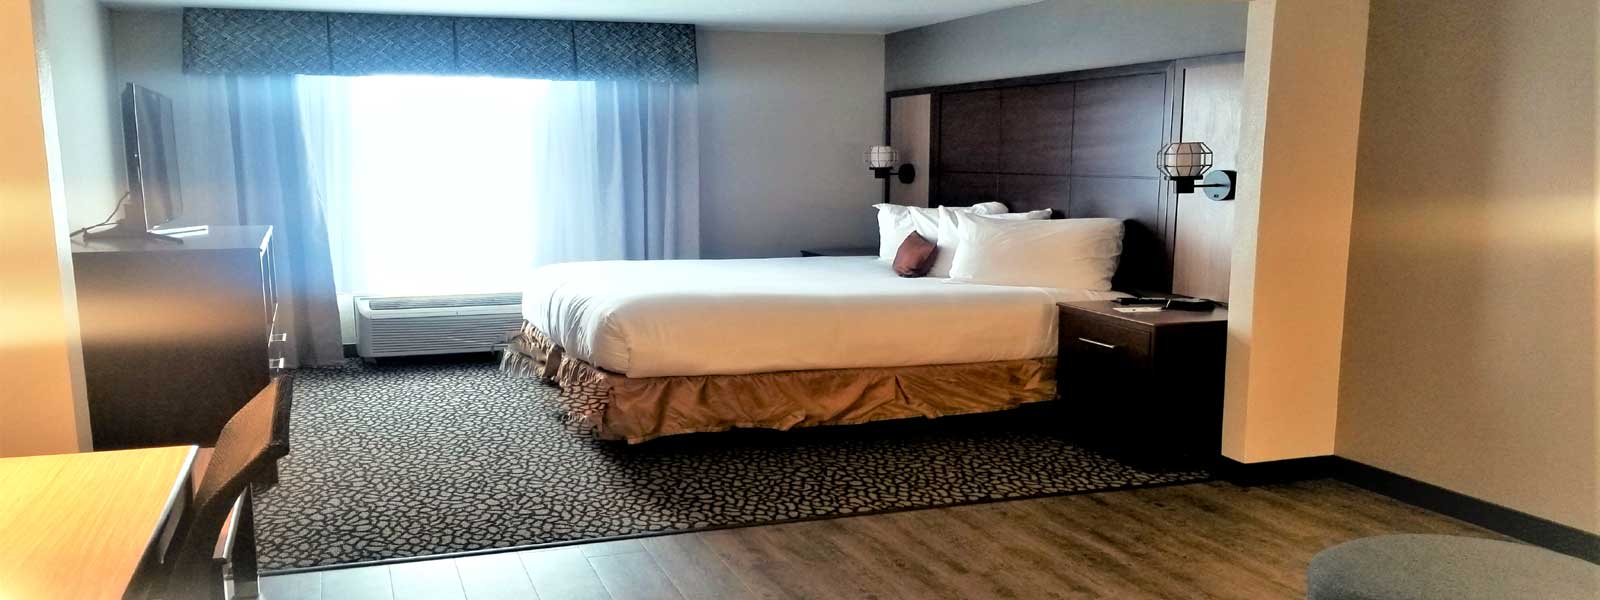 Wingate Dallas DFW Airport Affordable Lodging in Irving Texas Clean Comfortable Rooms Newly Remodeled Close to Downtown